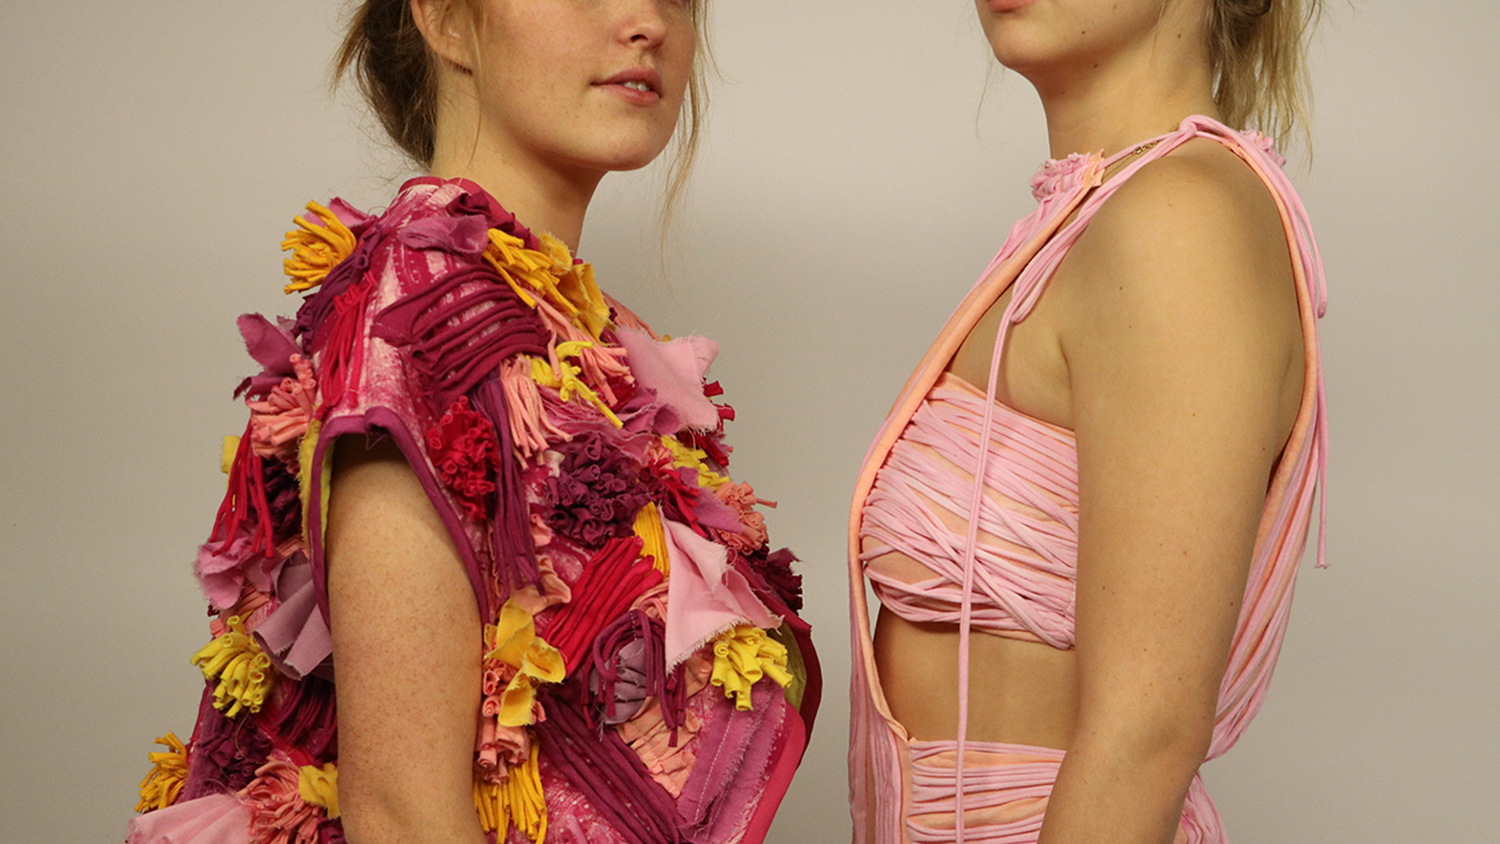 Two students model pink, textural garments as part of an Art2Wear collection.